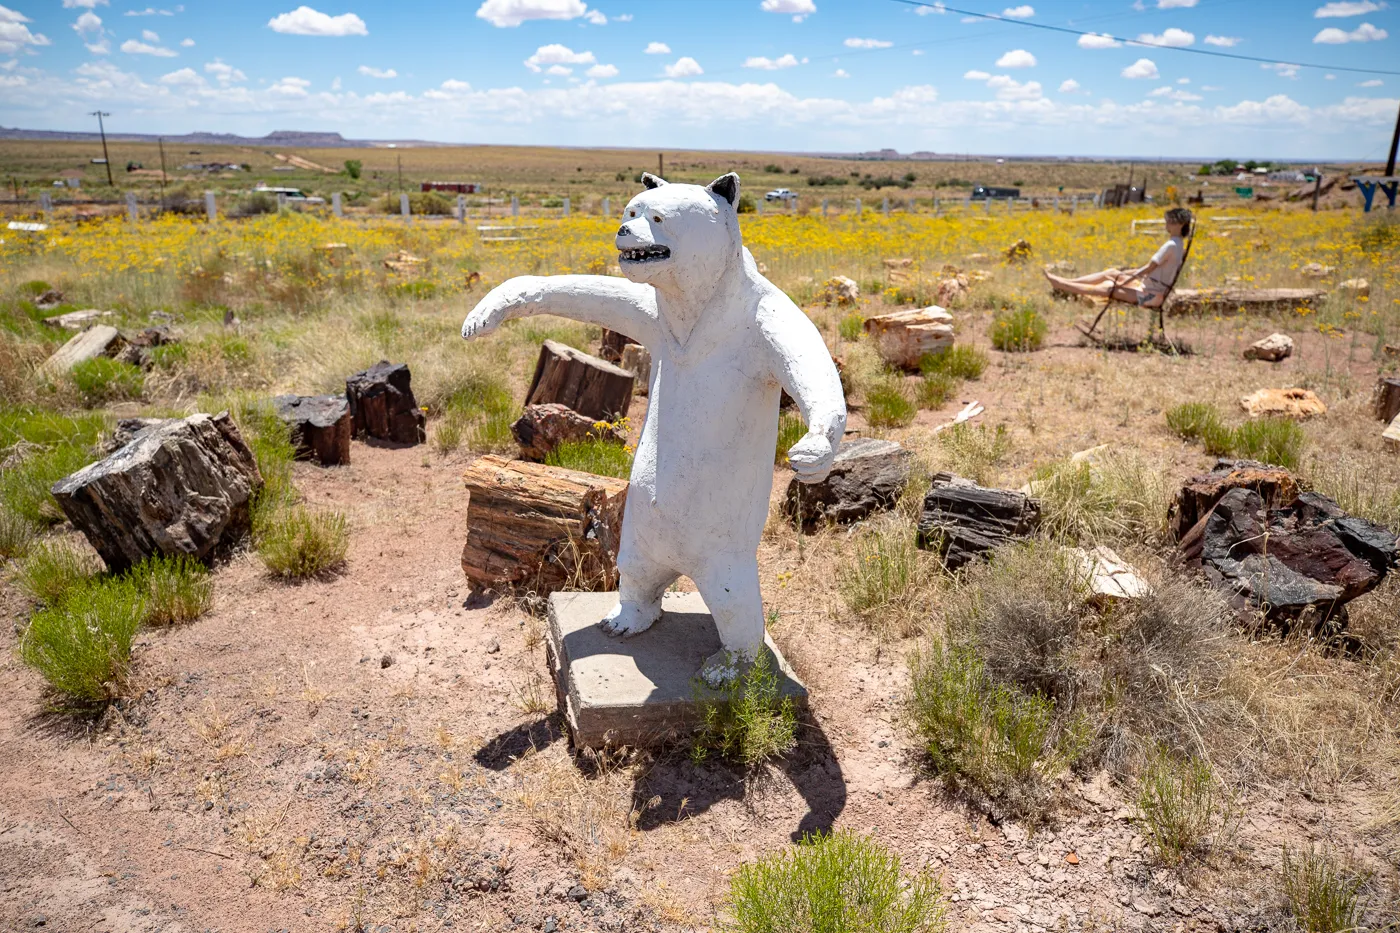 Polar Bear at Stewart's Petrified Wood in Holbrook, Arizona Route 66 Roadside Attraction